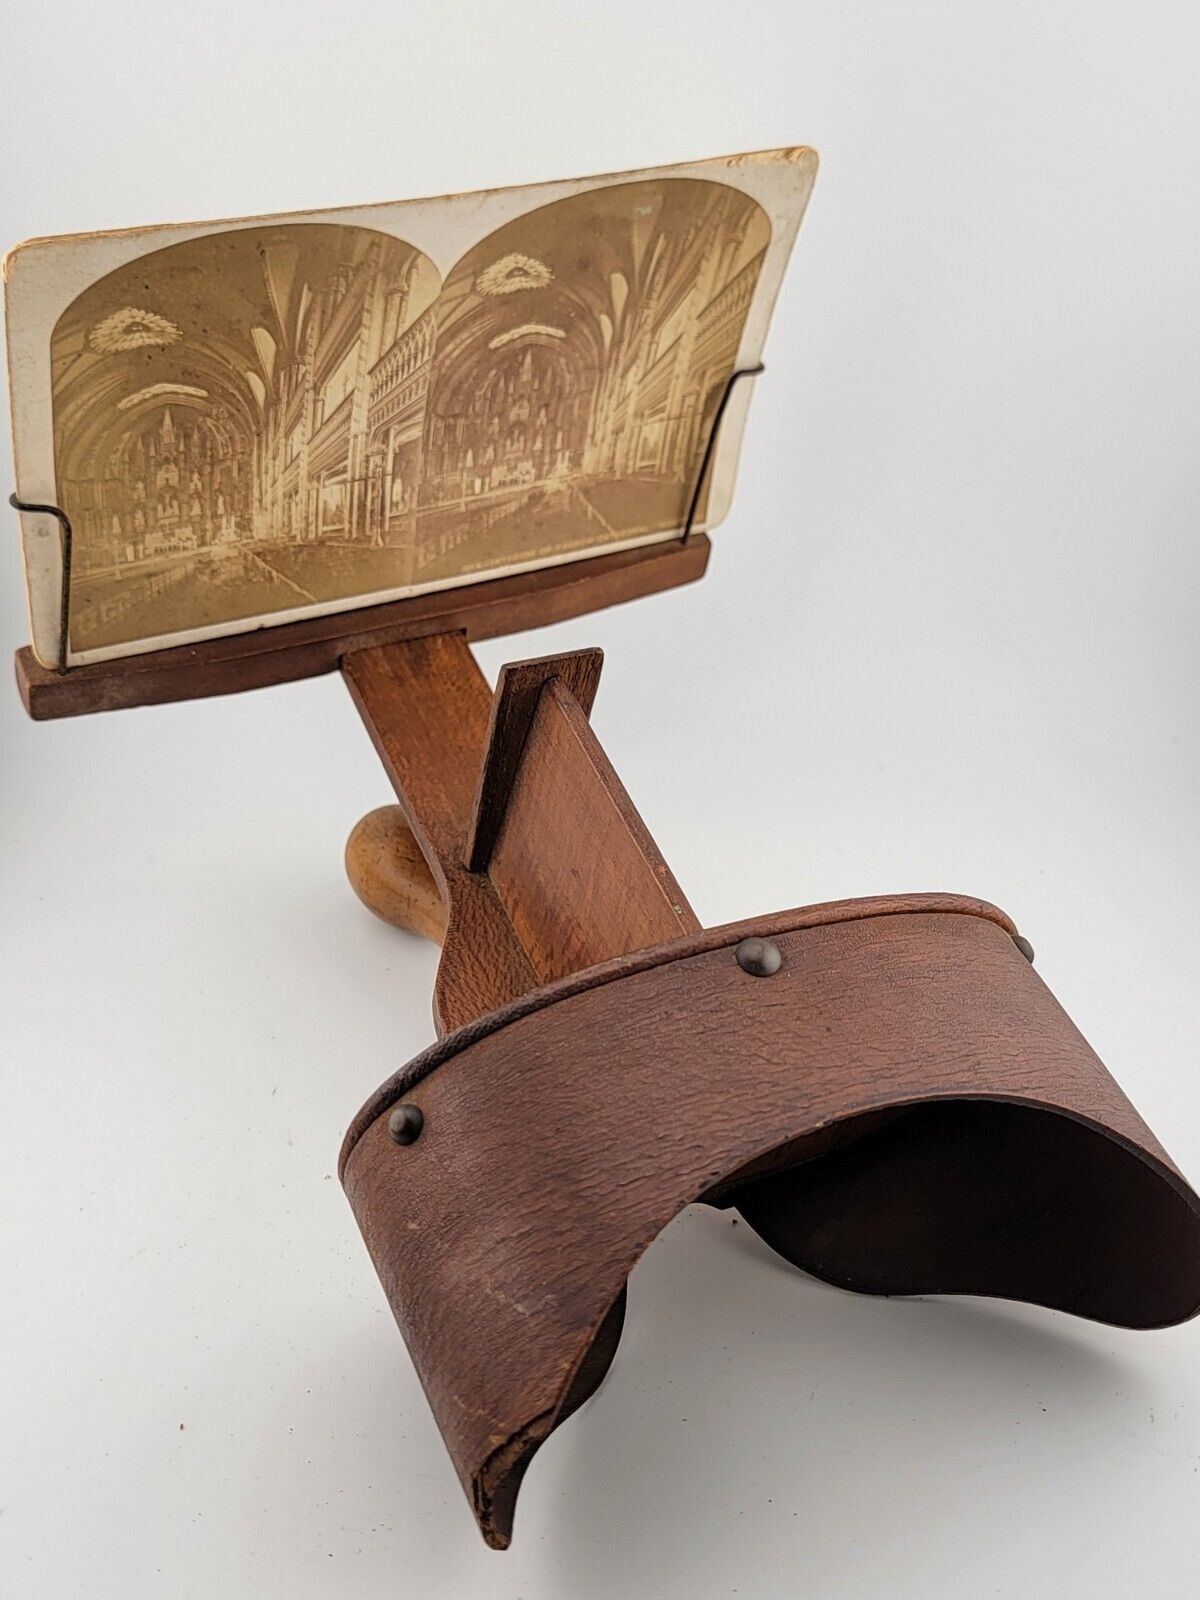 ANTIQUE RARE WOODEN STEREOSCOPE CARDS & VIEWER - CIRCA 1900'S. 